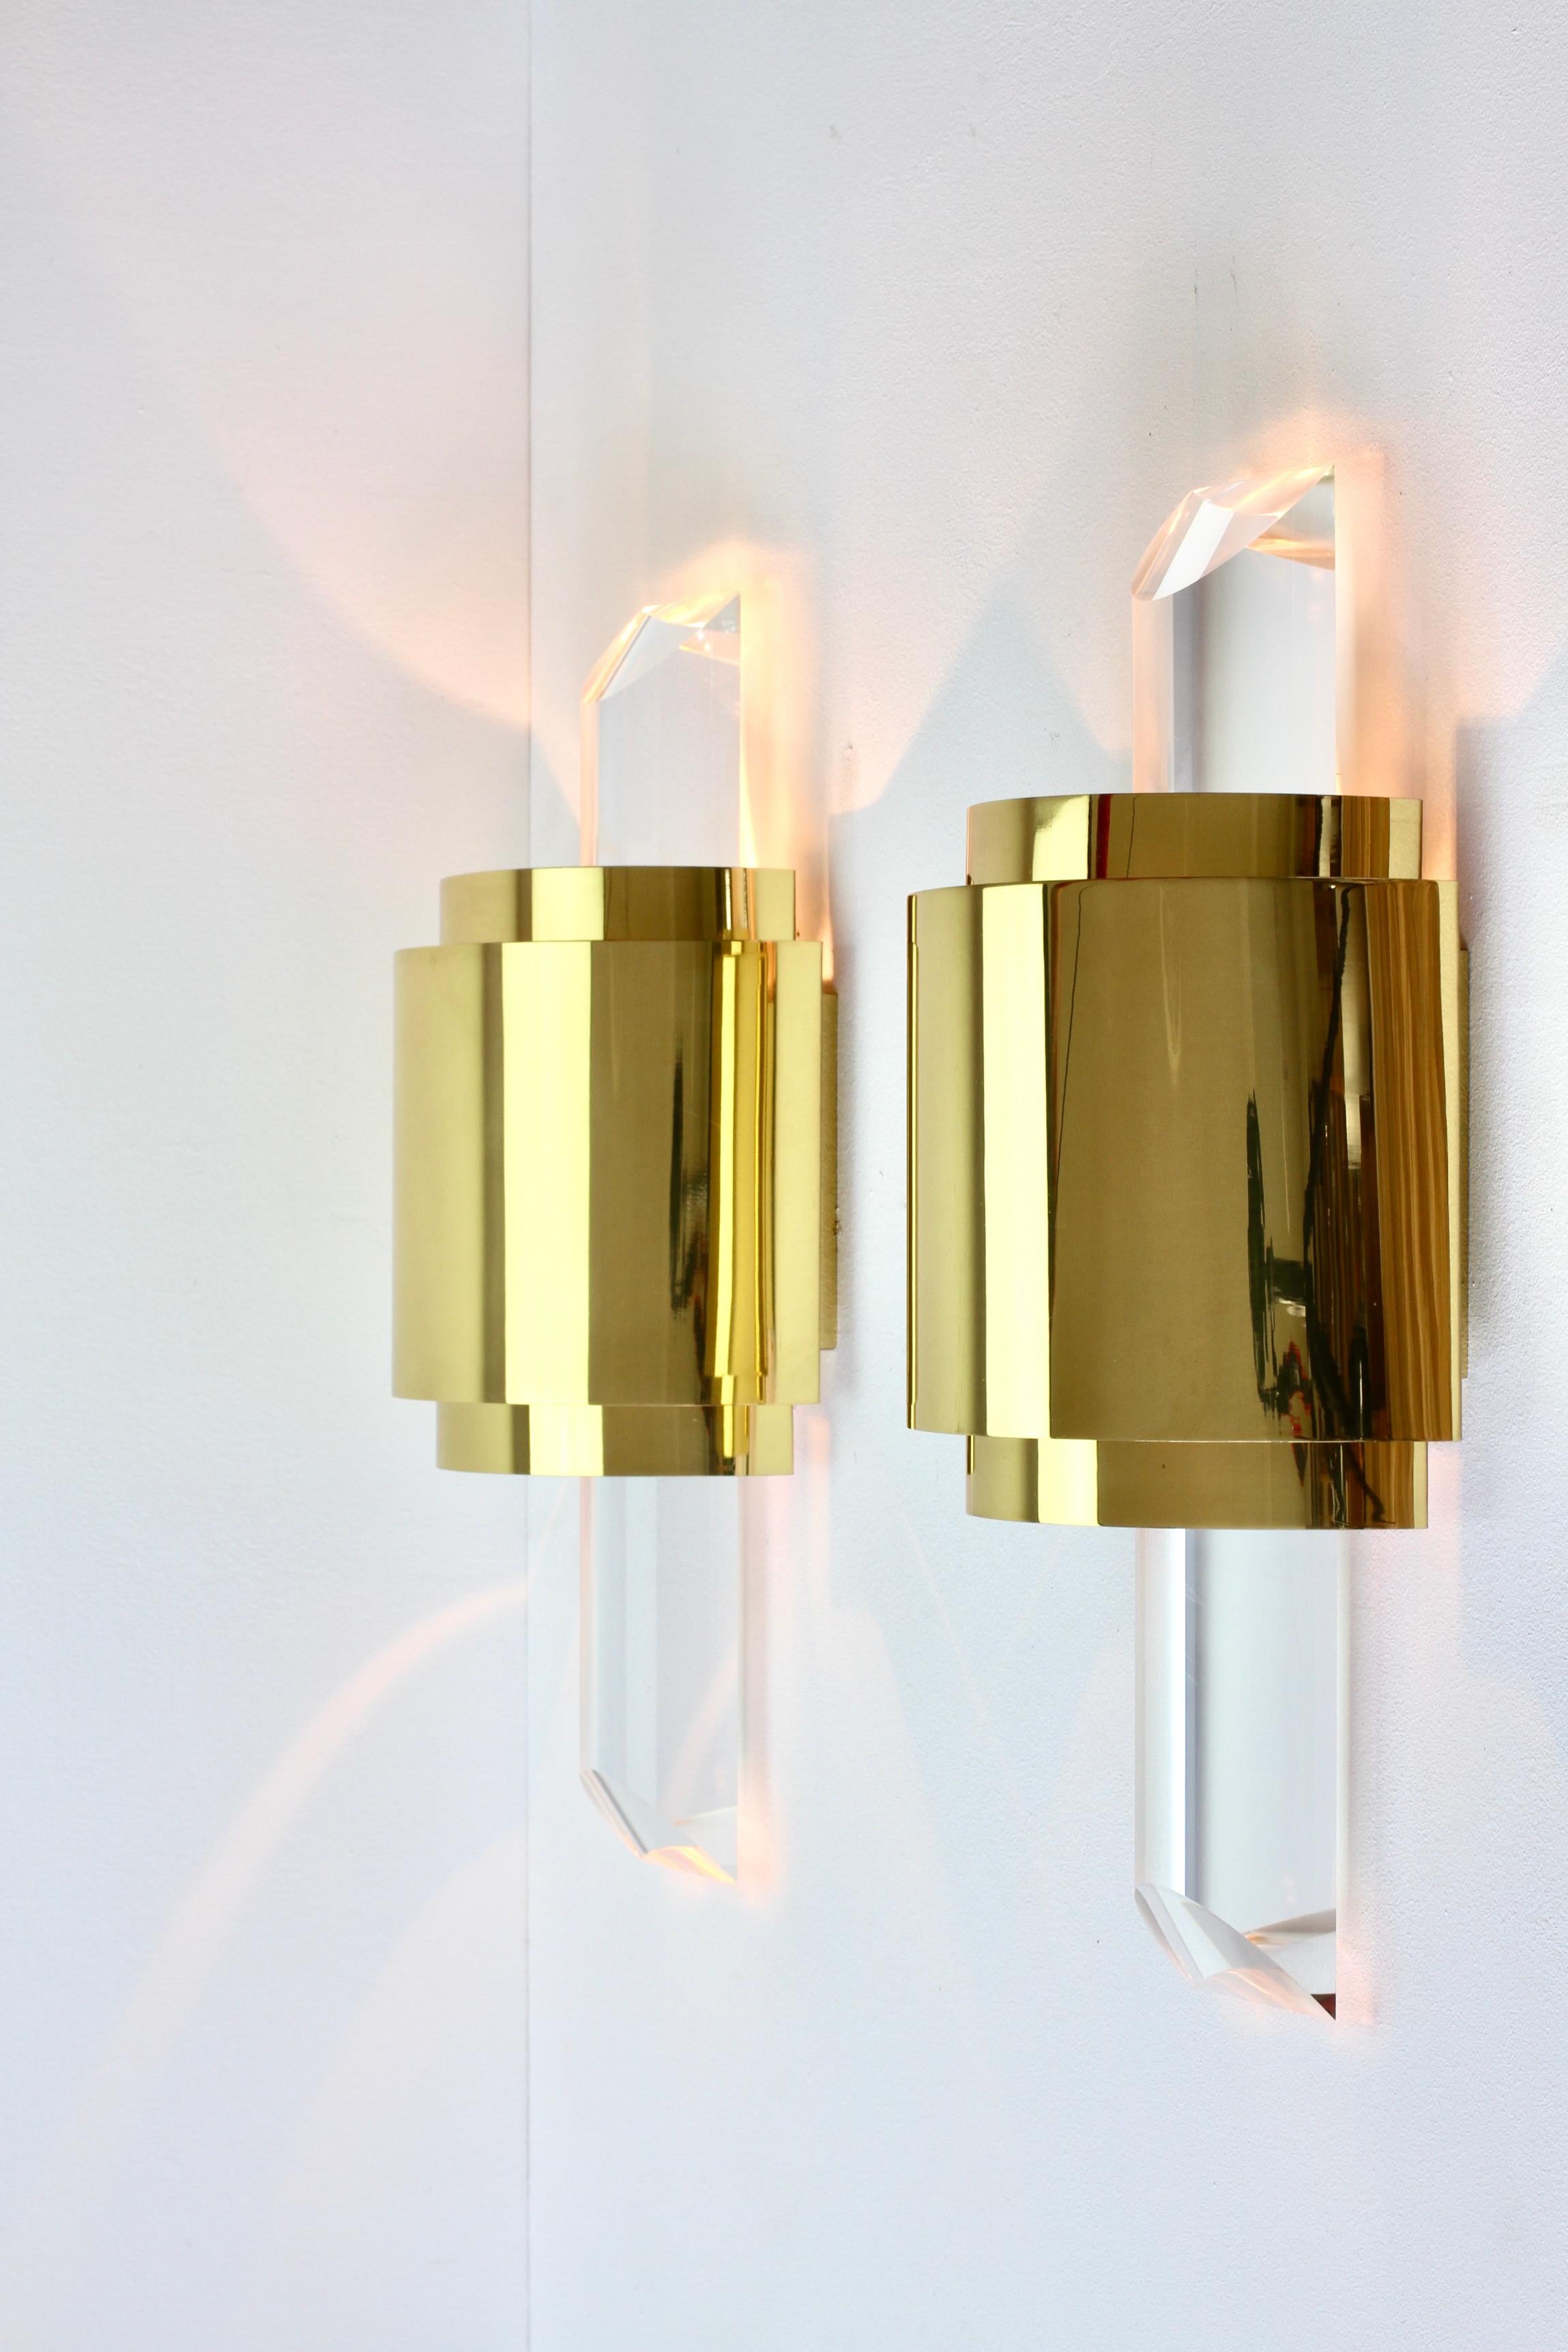 Italian Large Hollywood Regency Lucite and Brass Wall Lights or Sconces, circa 1970s For Sale